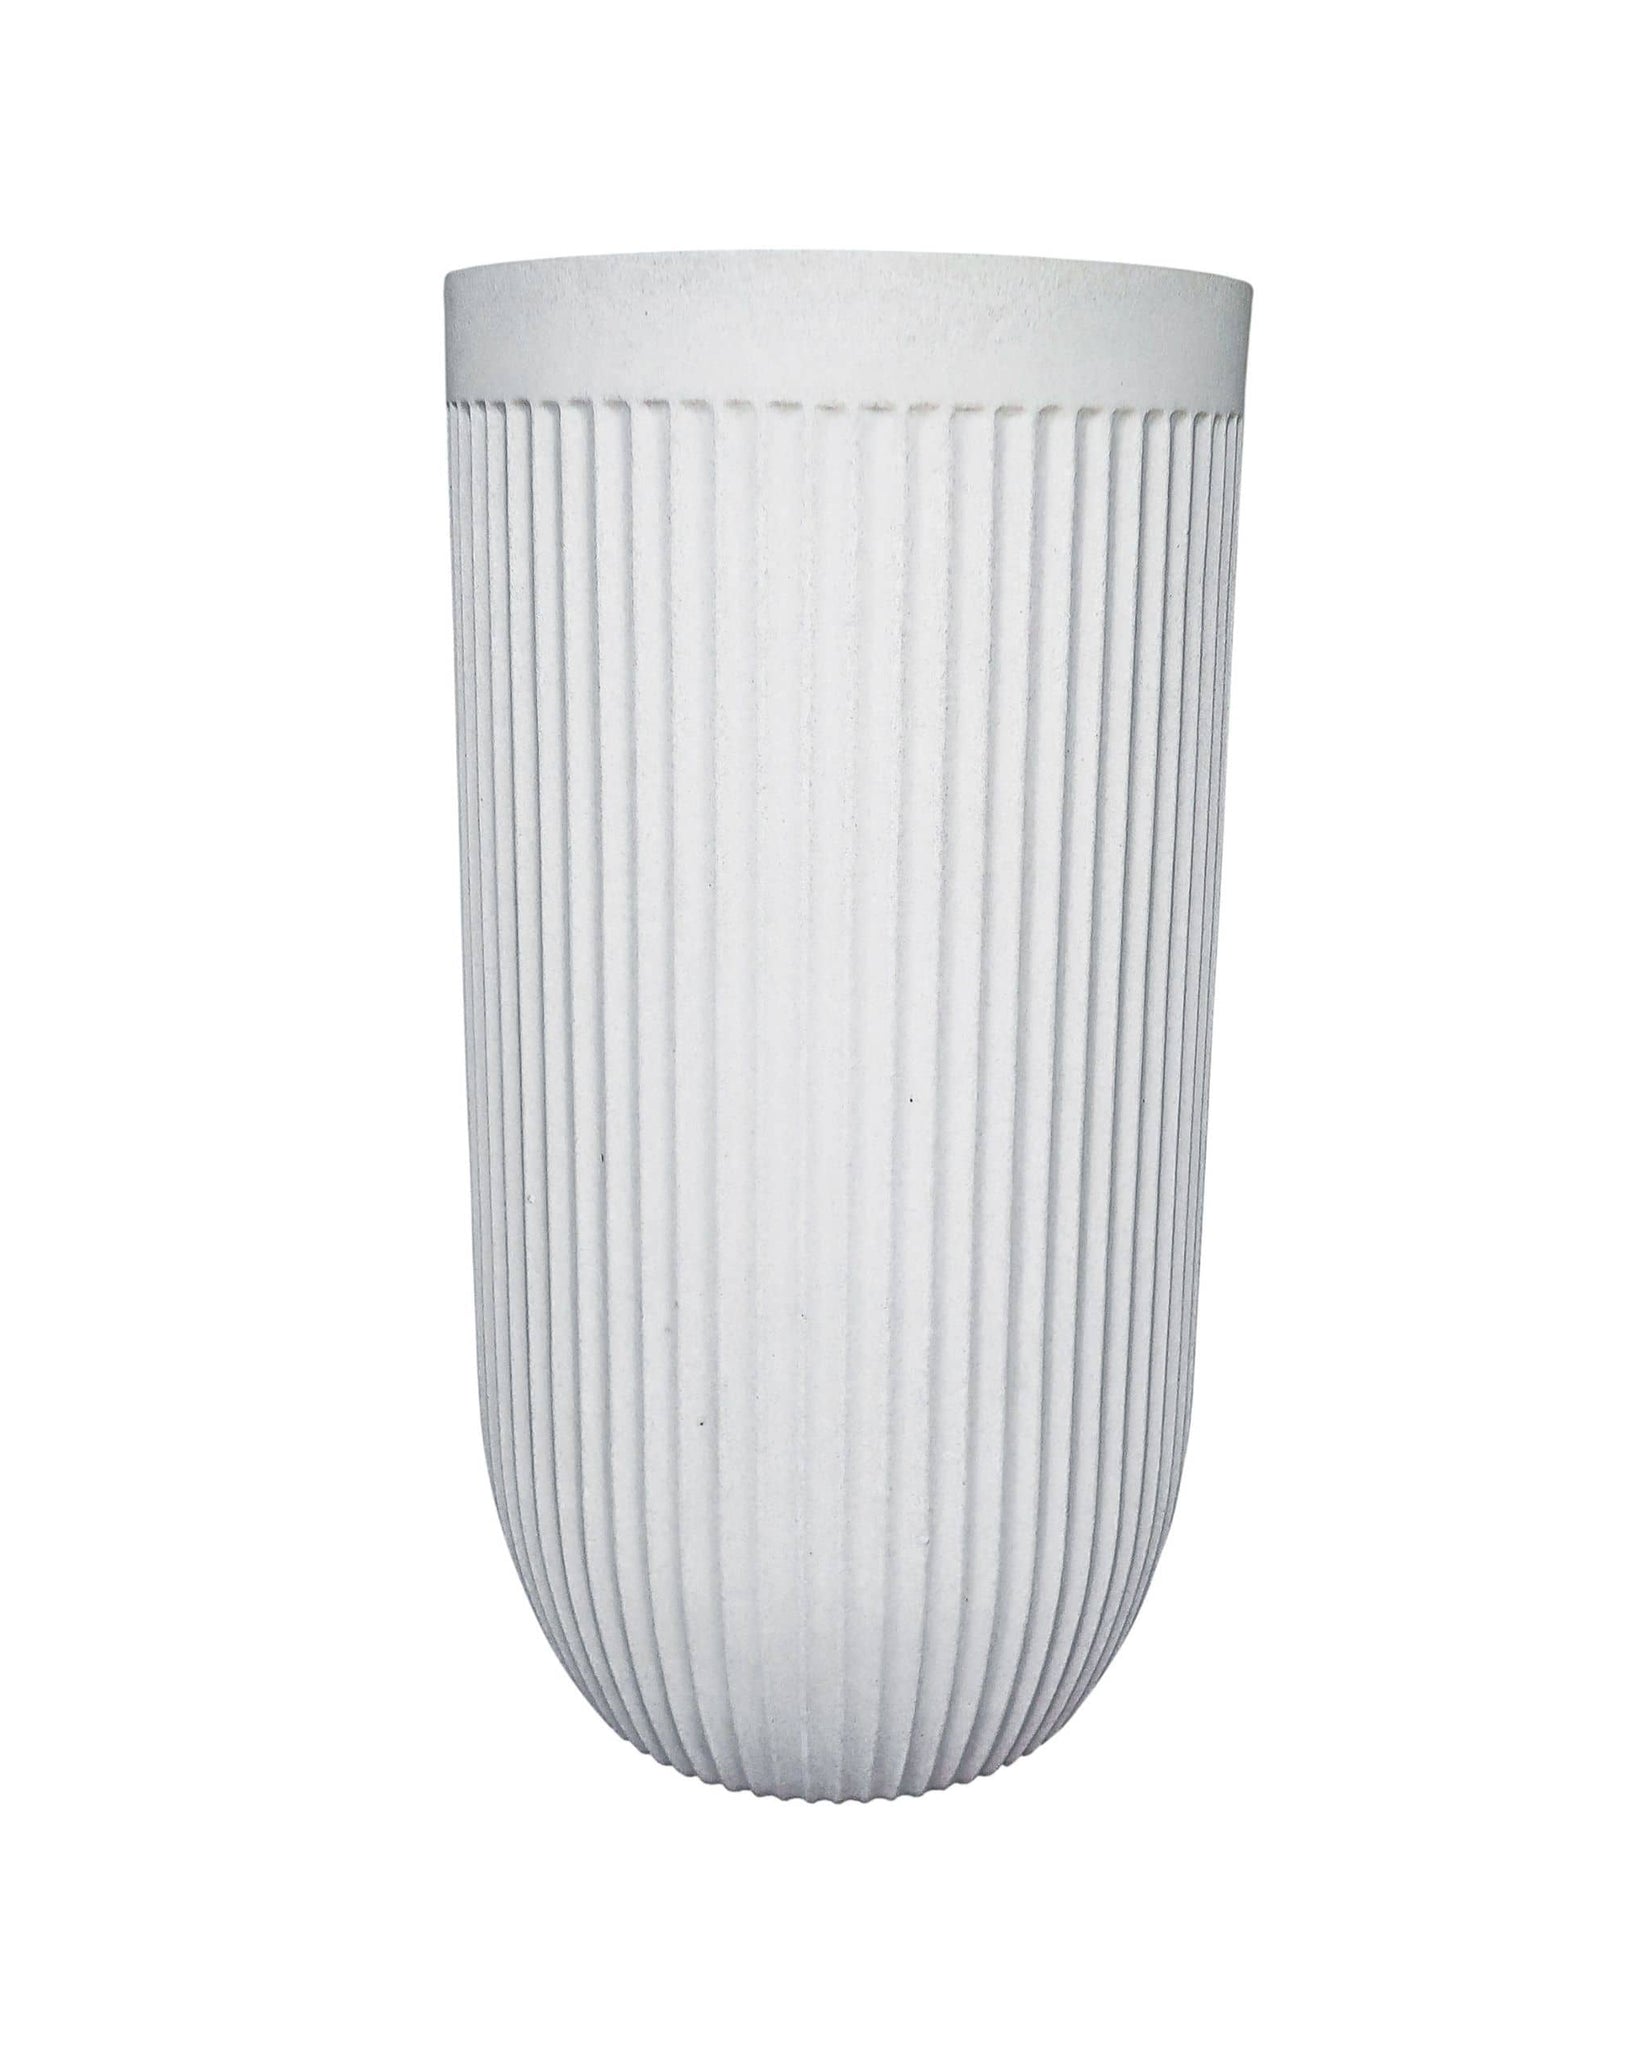 Side view of the tall and elegant planter showing off the unique fluted design in the colour off-white